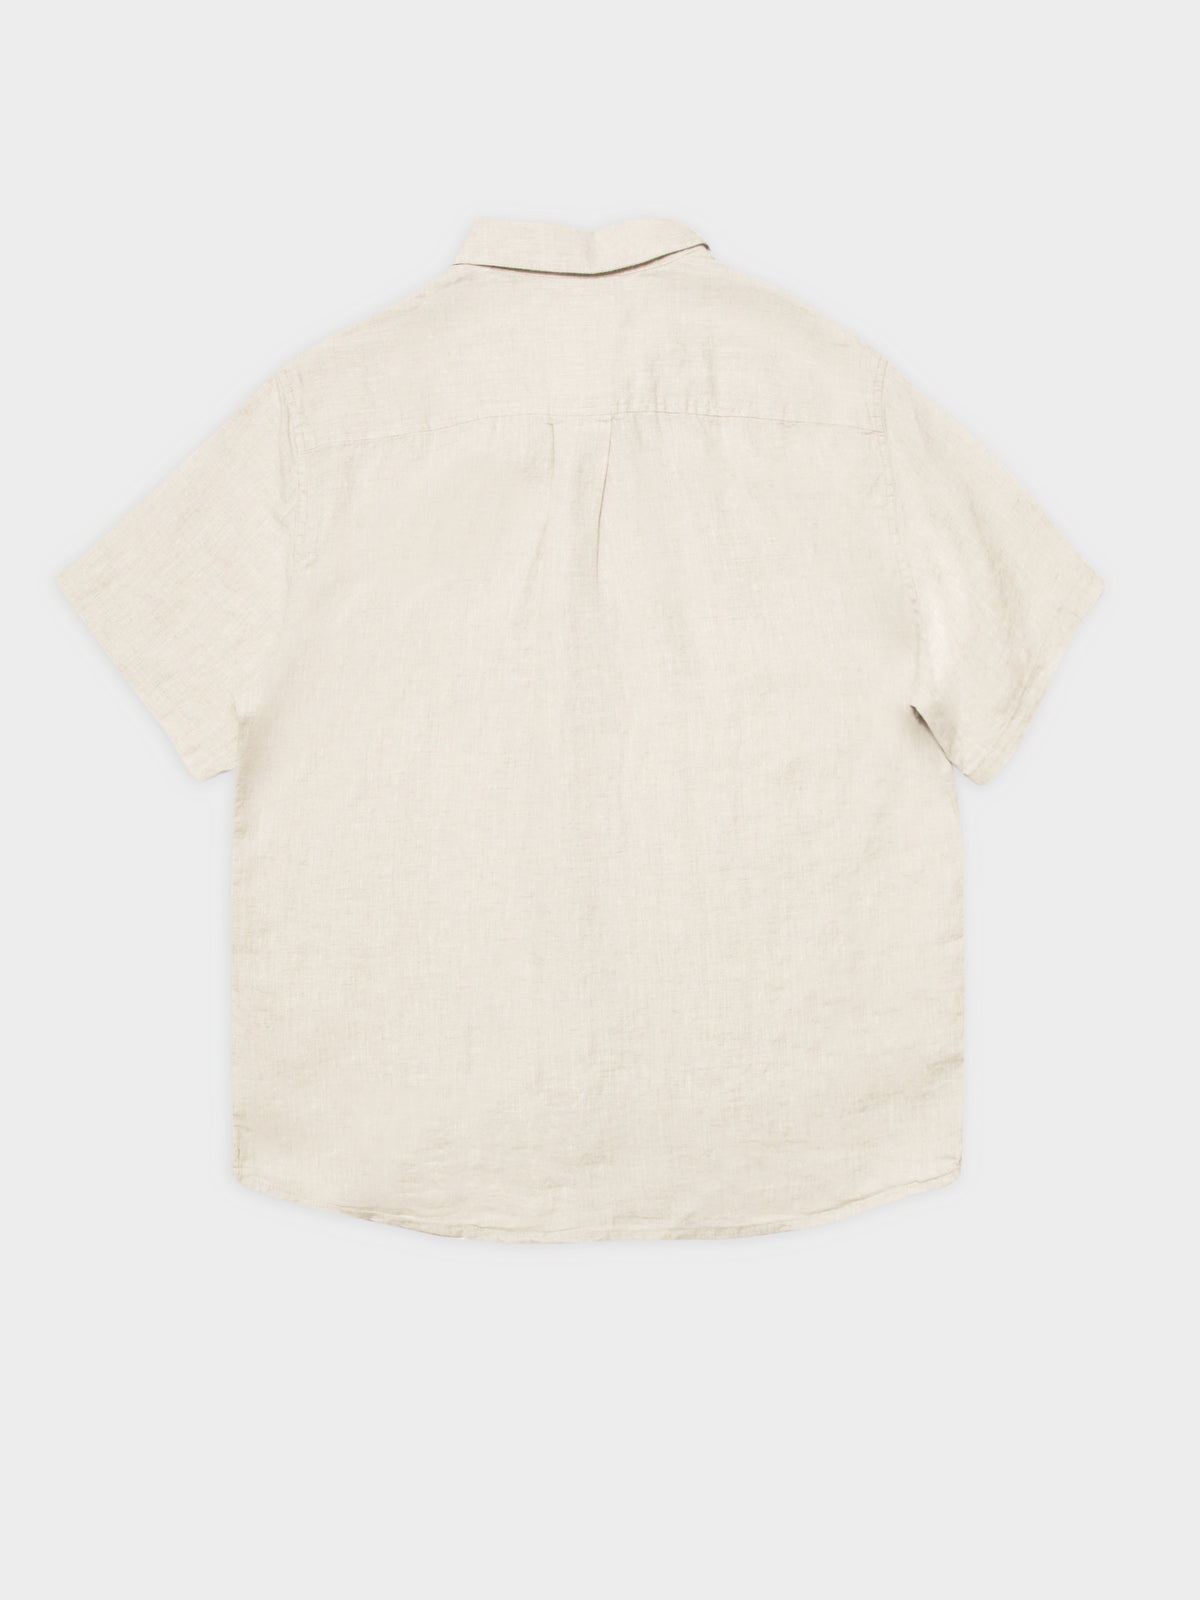 Nero Linen Shirt in Natural Marle